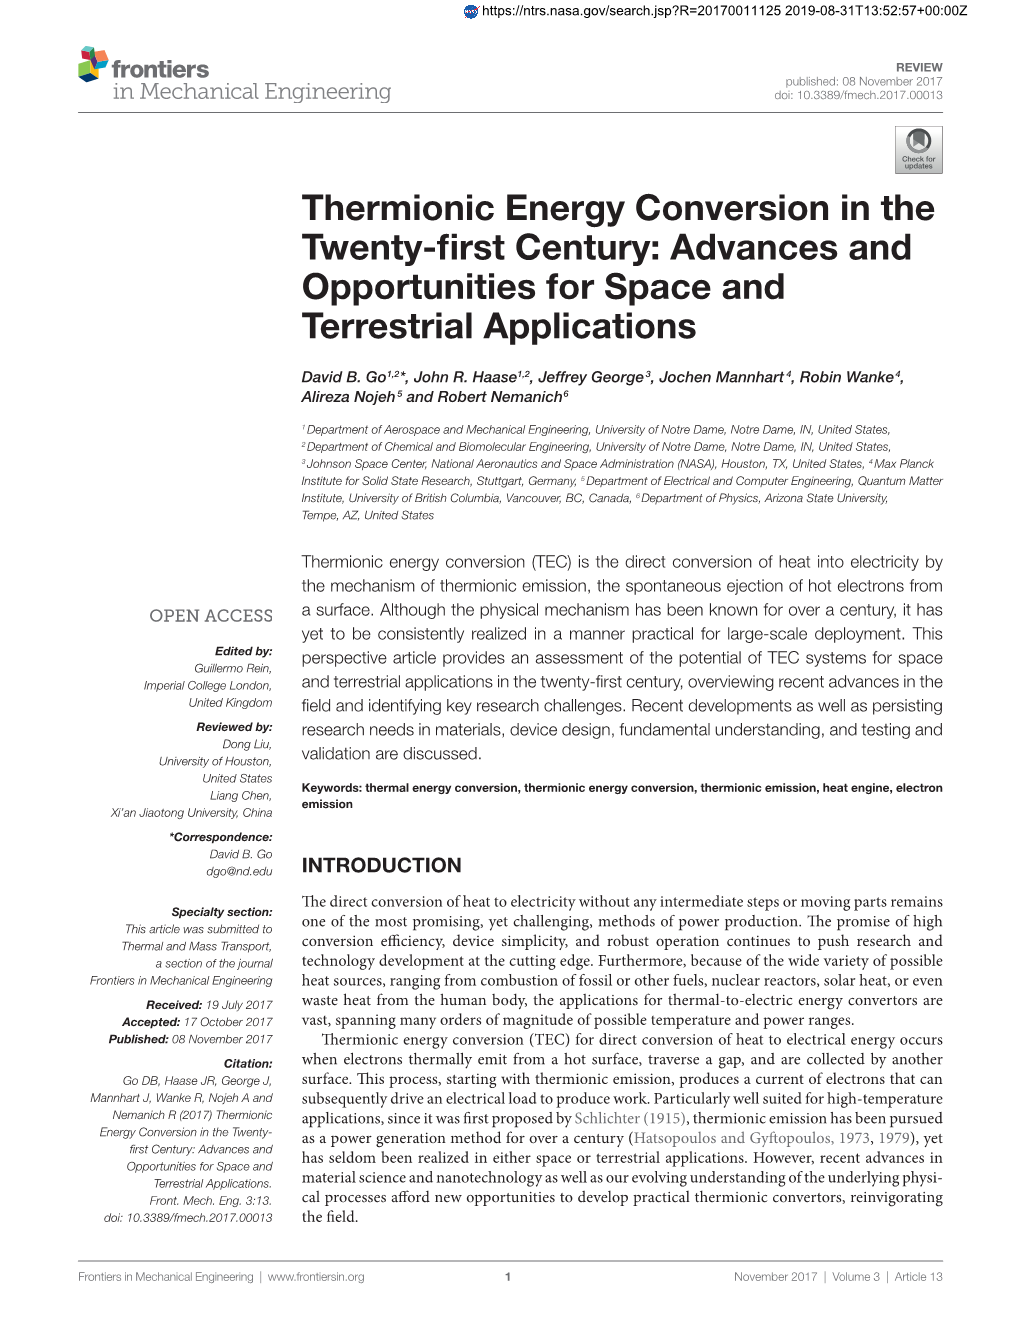 Thermionic Energy Conversion in the Twenty-First Century: Advances and Opportunities for Space and Terrestrial Applications